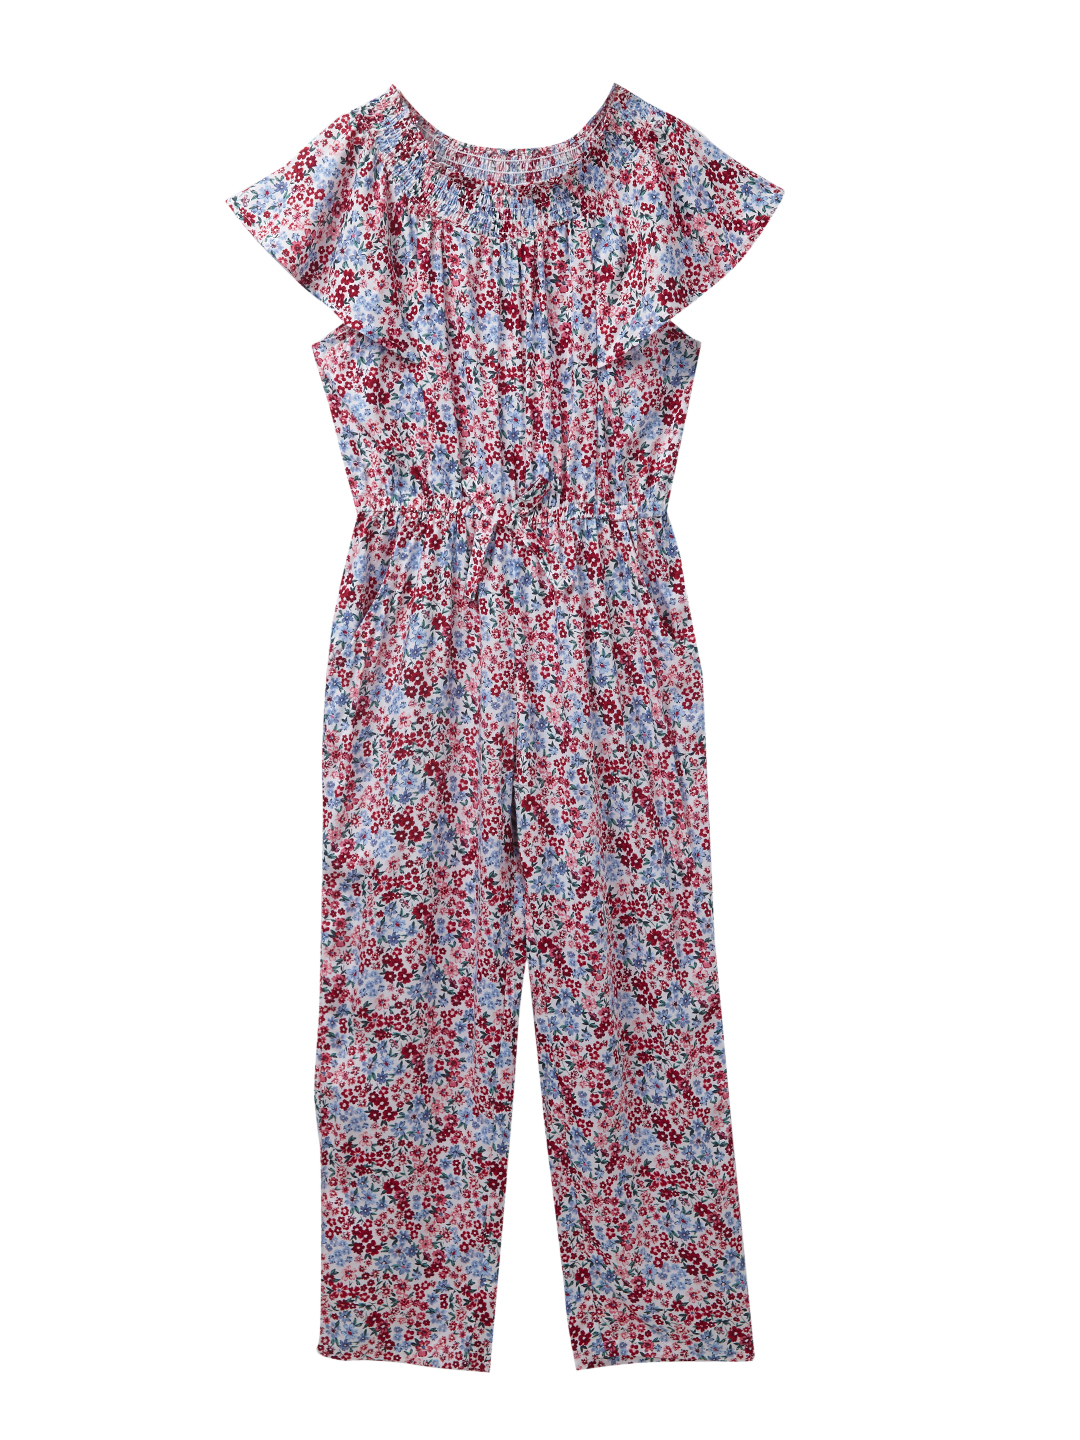 Multicolor jumpsuit for 12-13 year girl at Cub McPaws